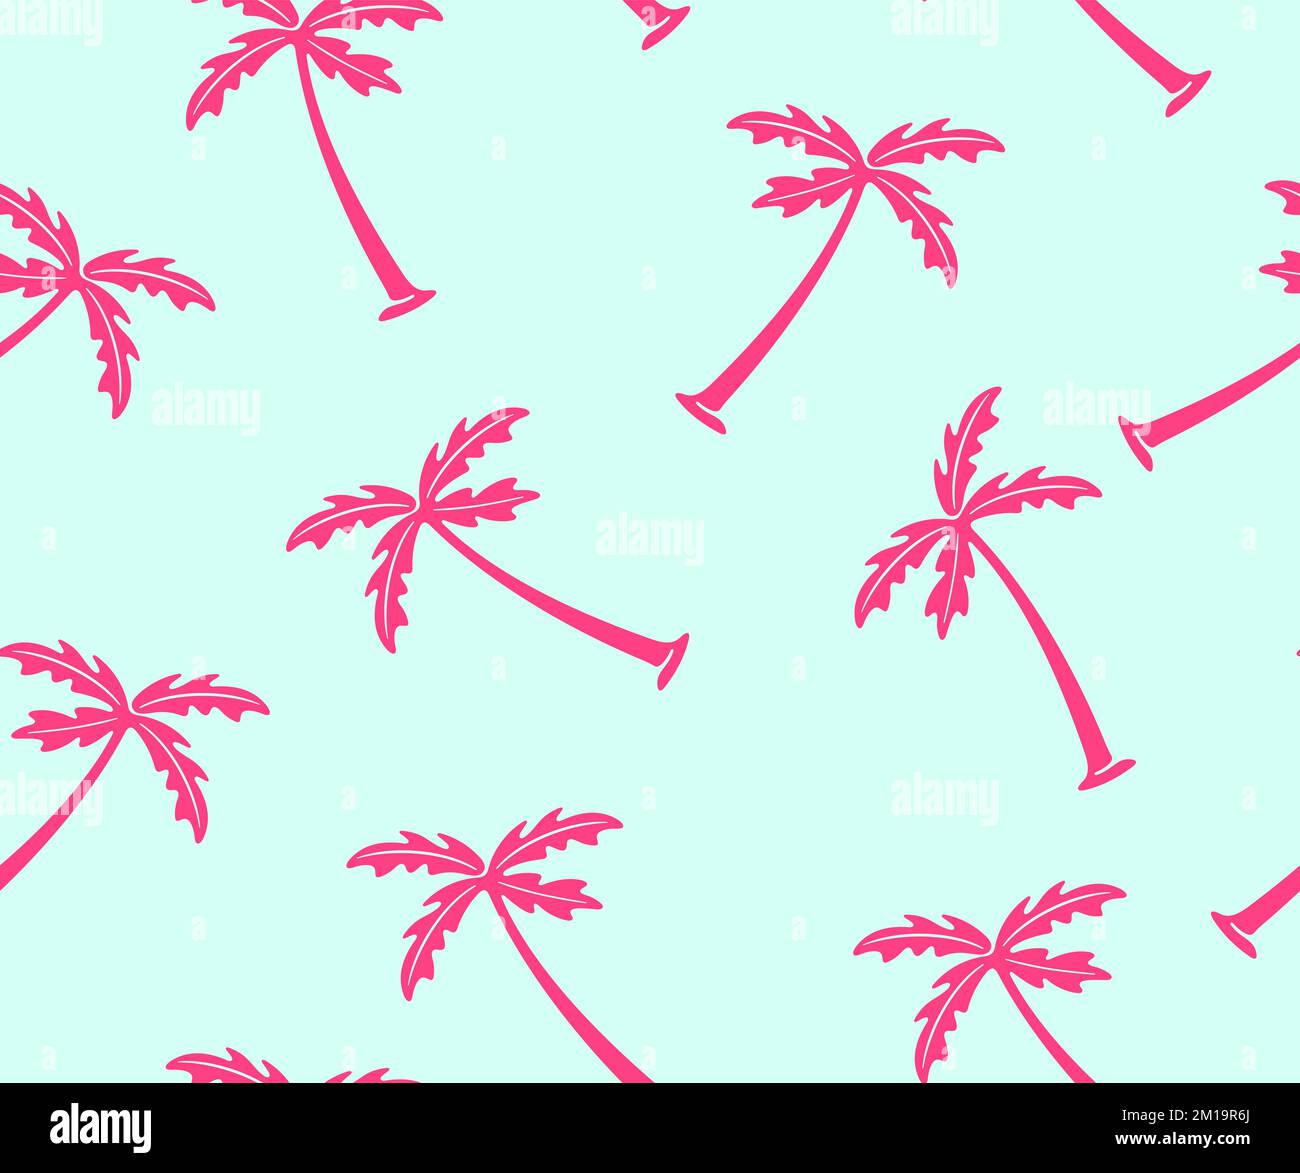 Palm tree, tree, plants, nature and tropics, seamless vector background, pattern. Leaves, leaf, foliage, flora and coconut palm Stock Vector